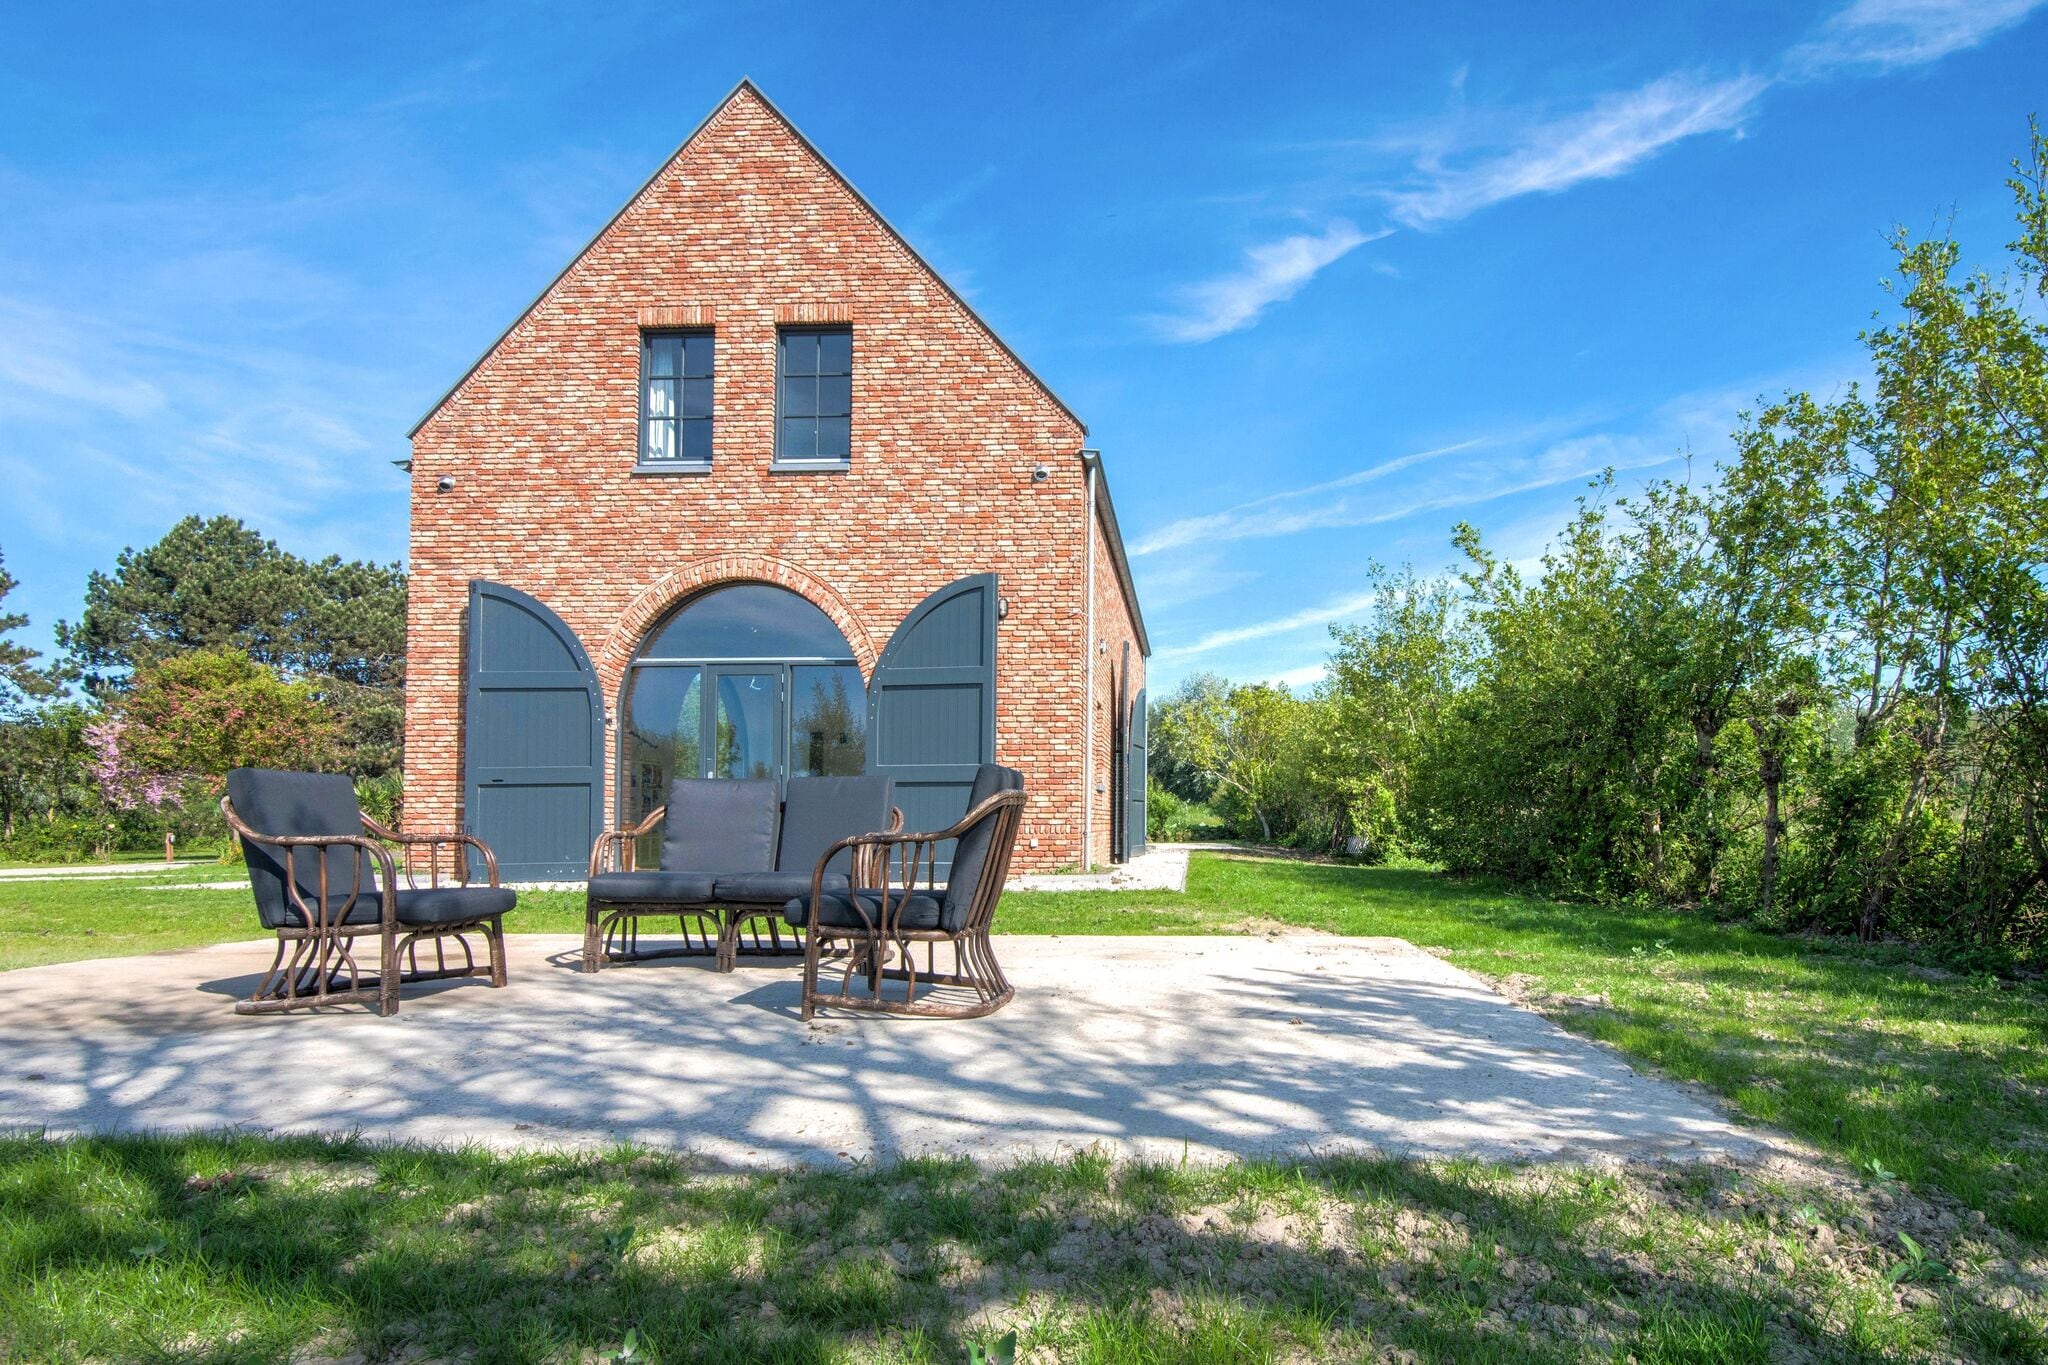 Villa in Cadzand surrounded by nature, near Knokke